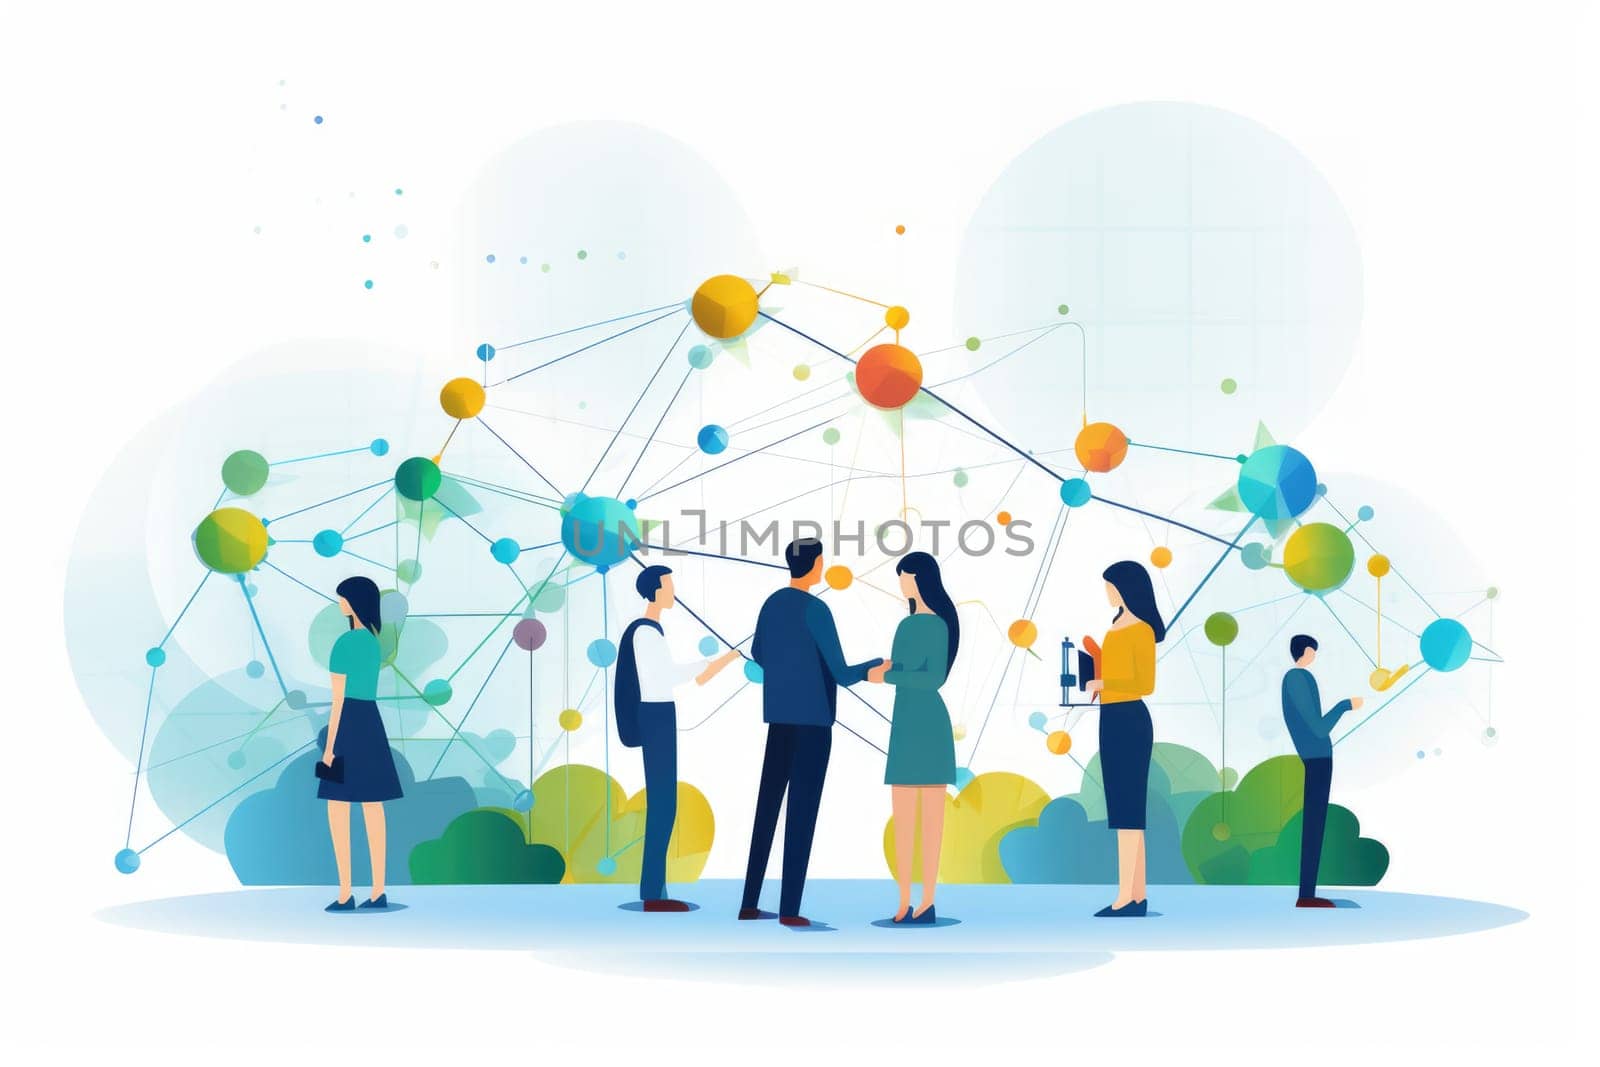 Networking building relationships cartoon illustration - Generative AI. Network, colorful, spheres, people. by simakovavector